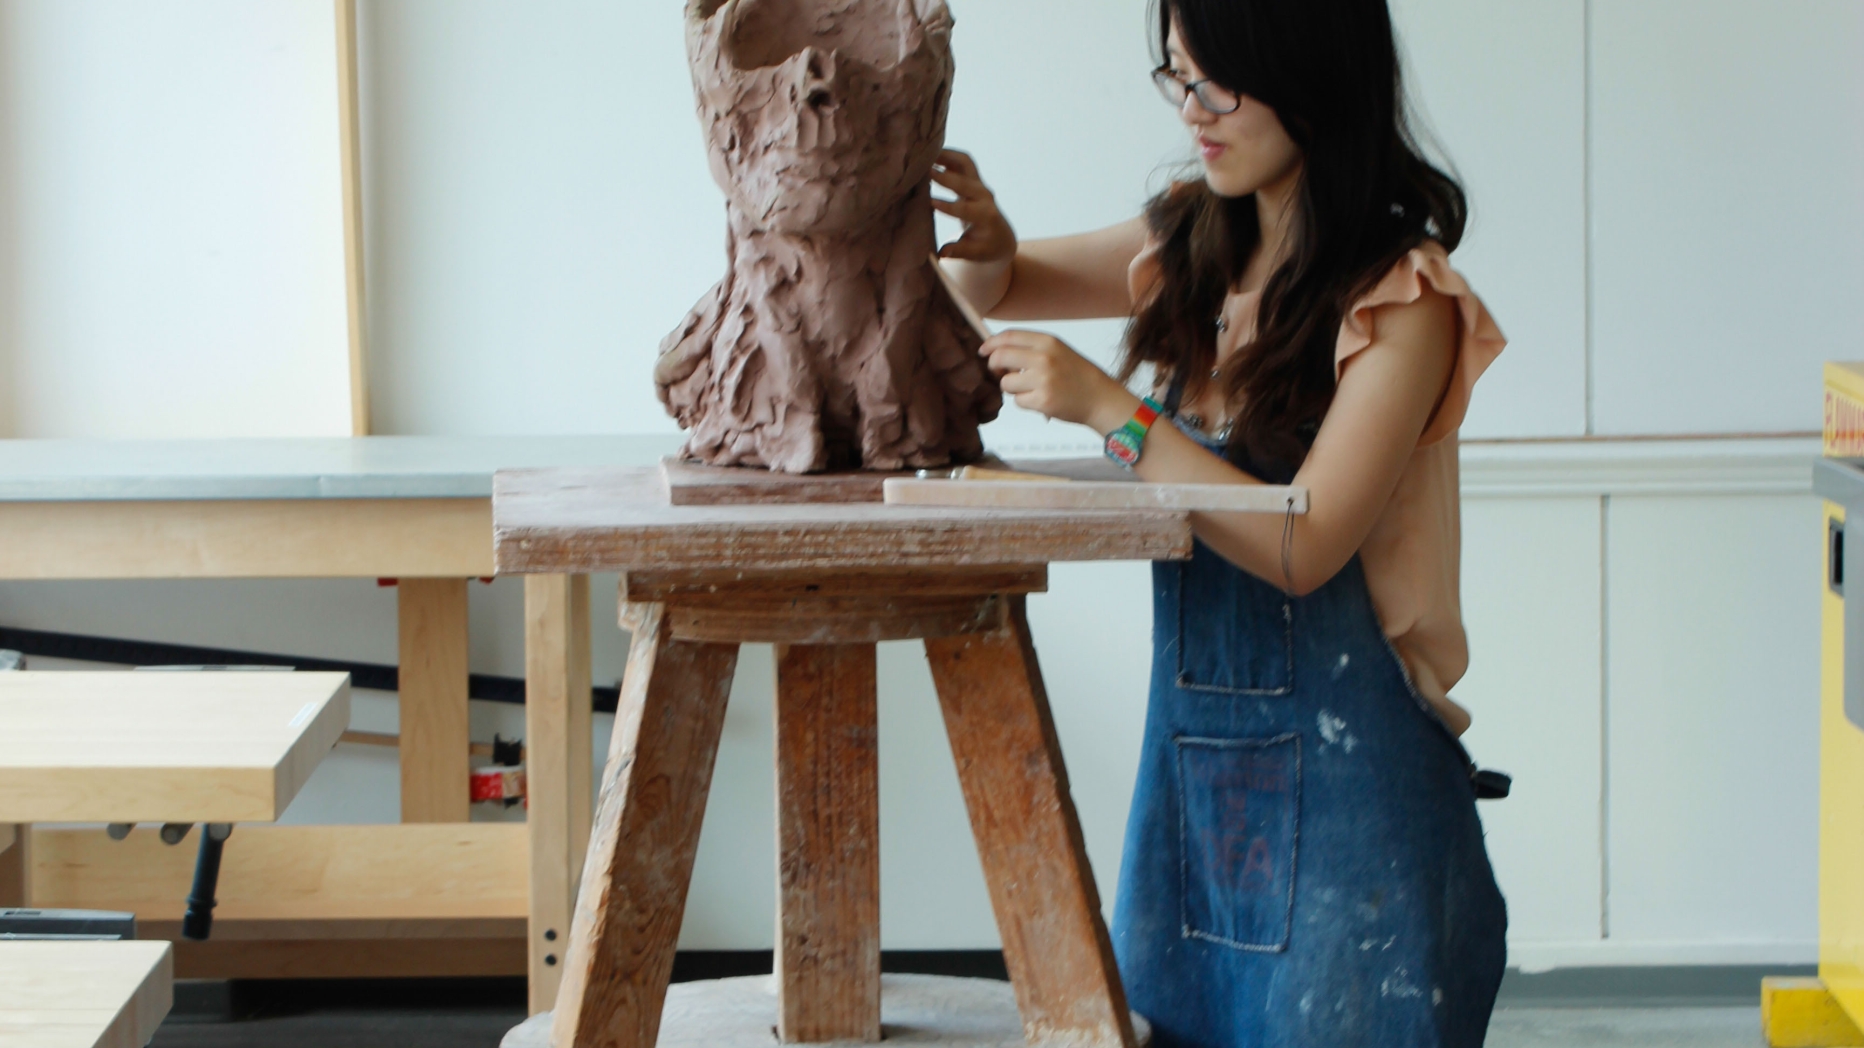 Student working clay in to a form that resembles the lower half of a human head and neck.